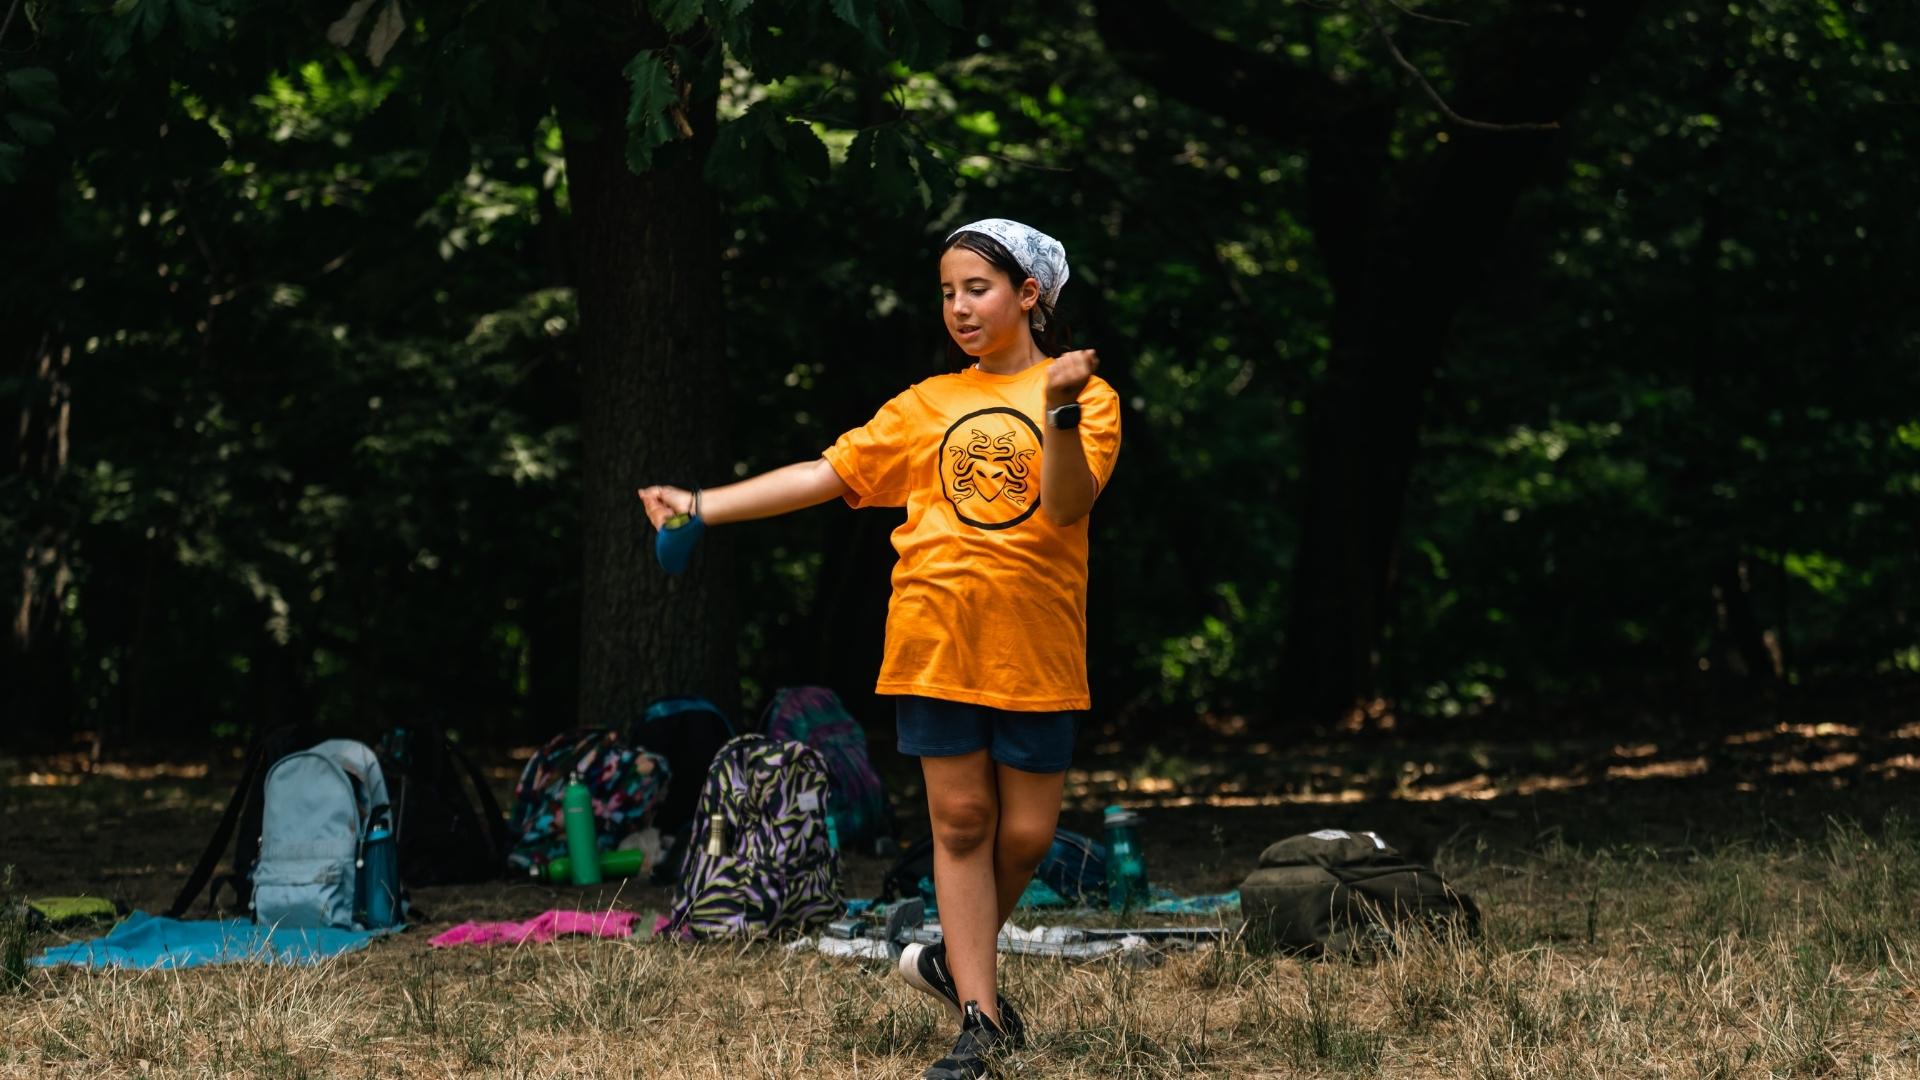 Camp Half-Blood Summer Camps - New year new look